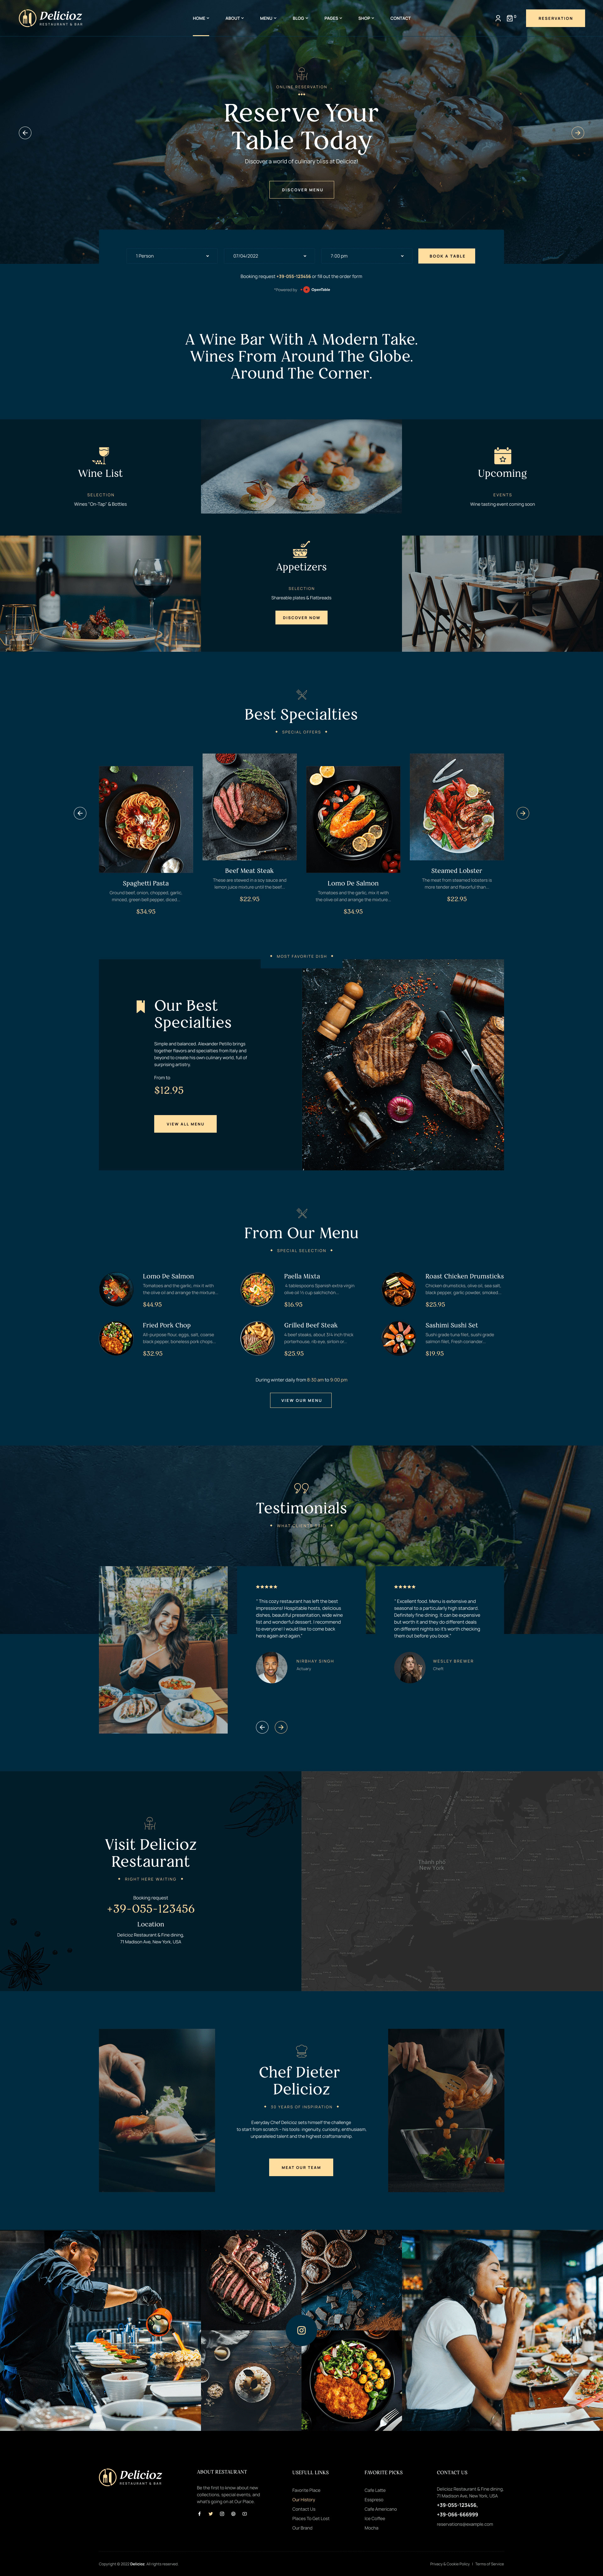 Page image of an amazing restaurant theme WordPress template.